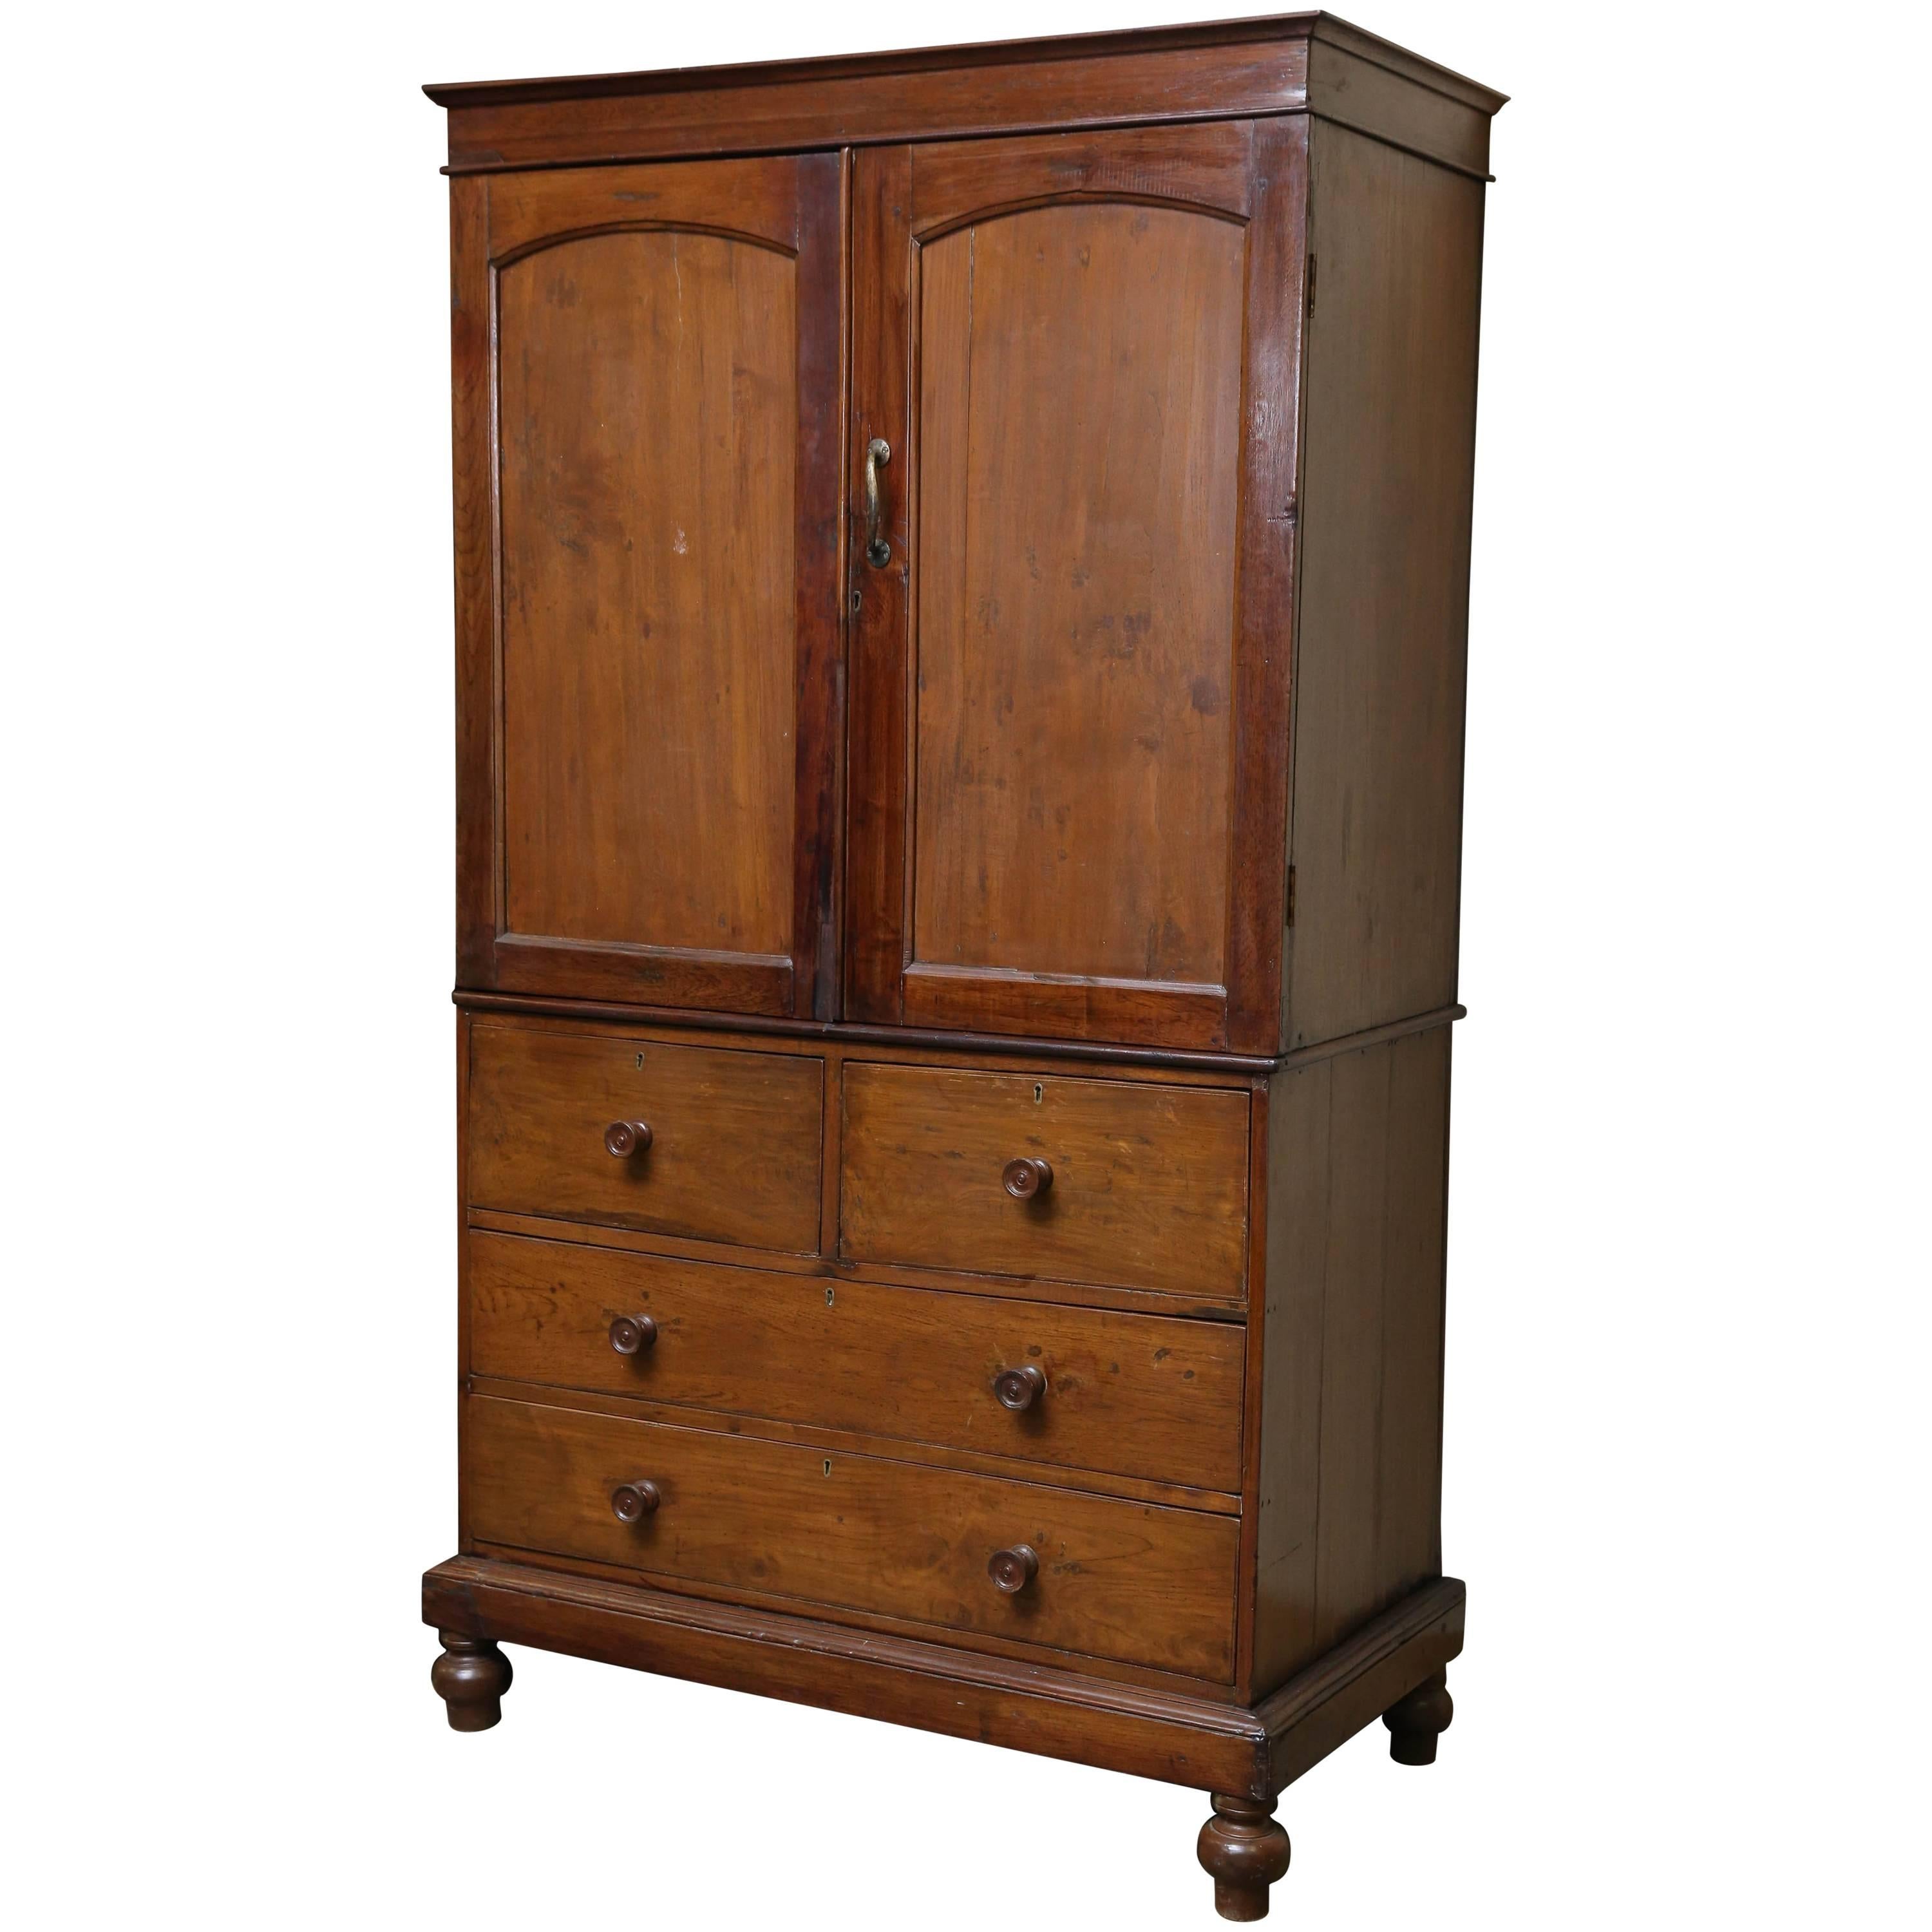 First Quarter of the 19th Century Mahogany Linen Chest with Pull through Drawers For Sale